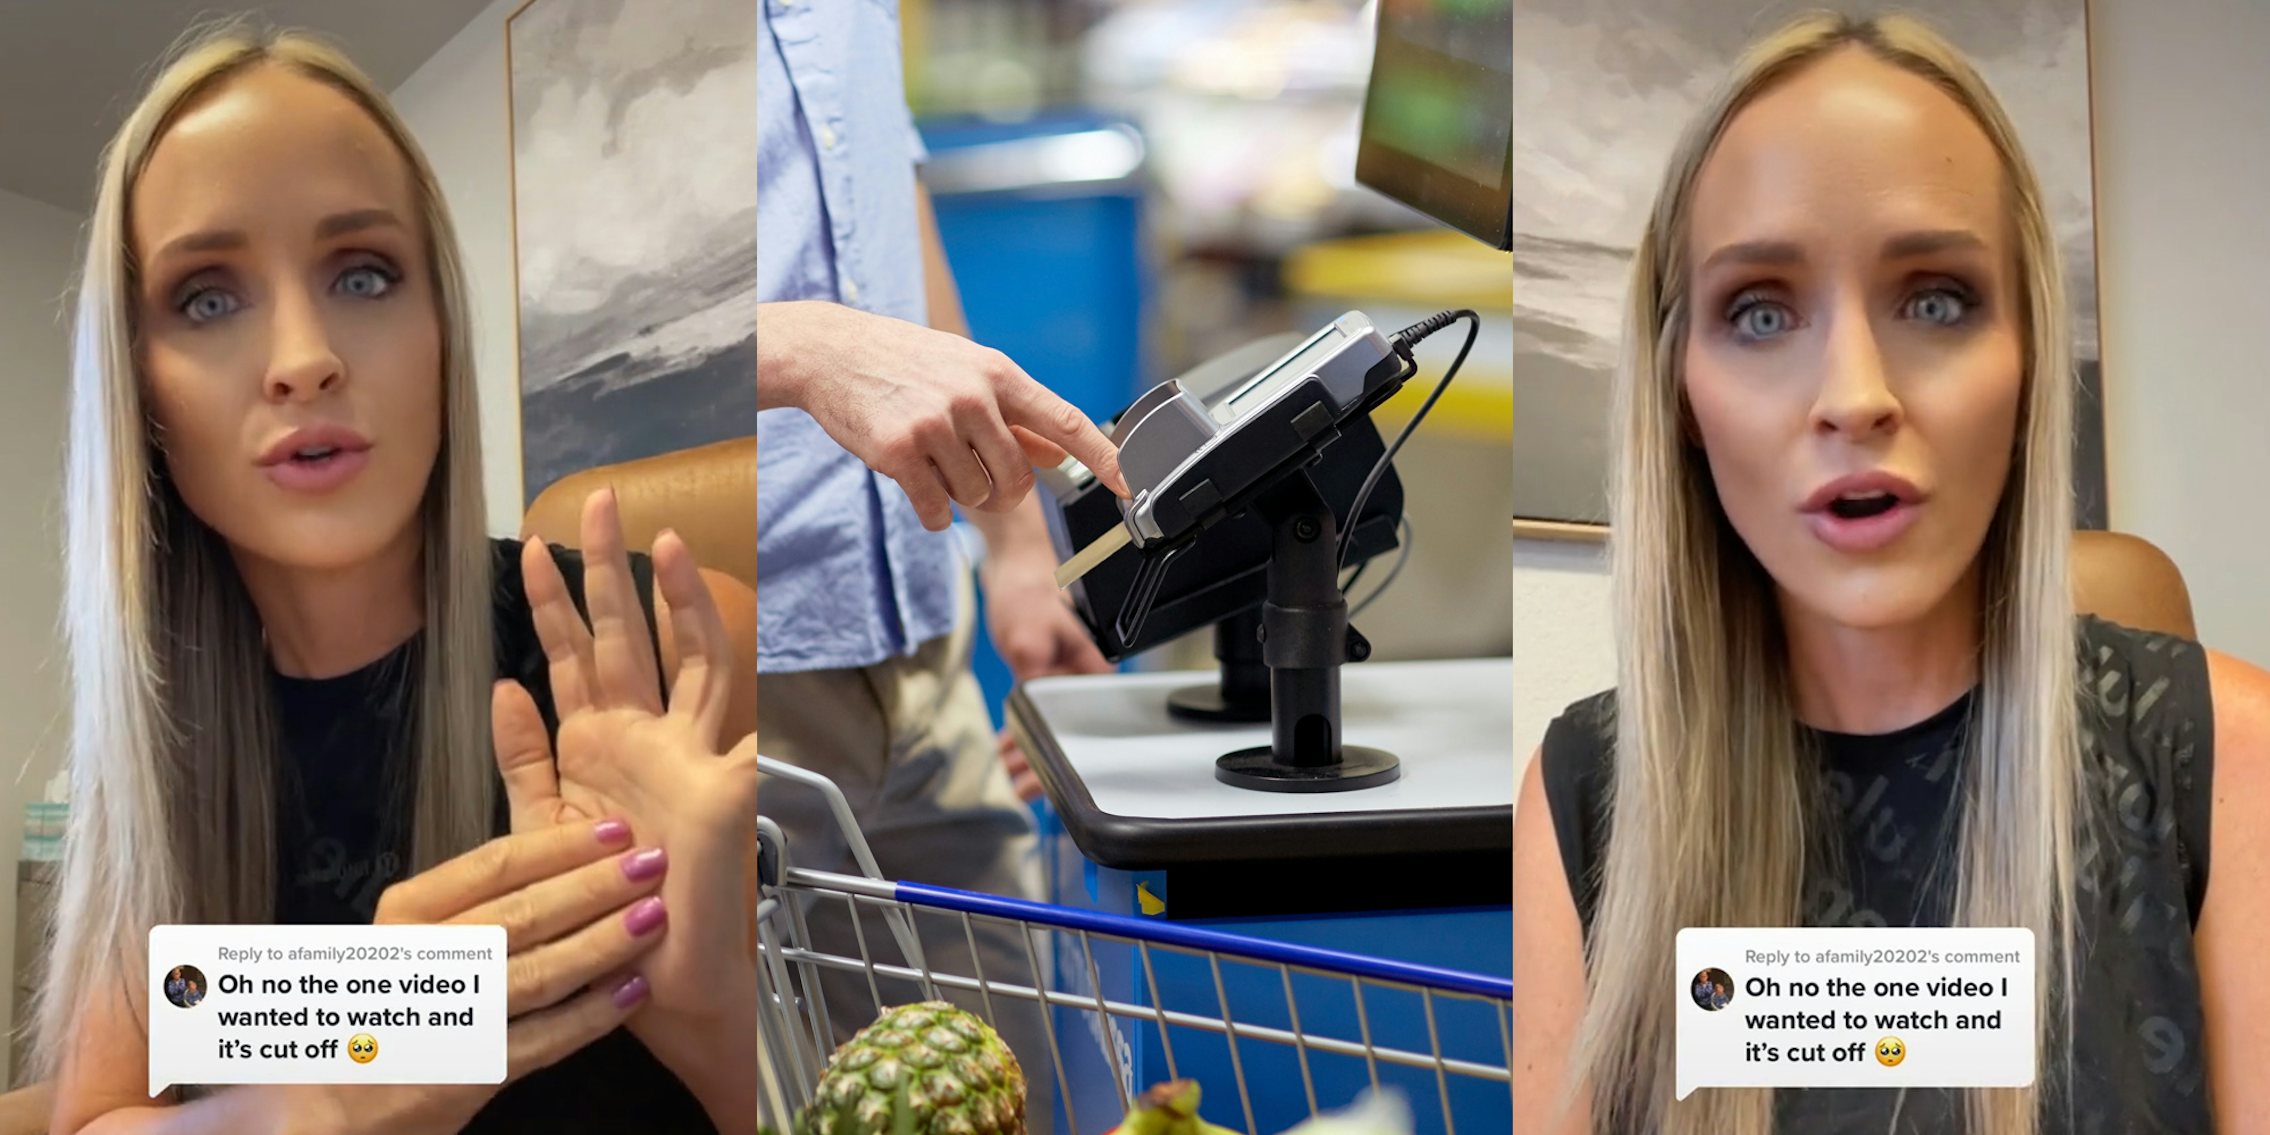 woman speaking and hand gesturing caption 'Oh no the one video I wanted to watch and it's cut off' (L) person using self checkout at store (c) woman speaking caption 'Oh no the one video I wanted to watch and it's cut off' (r)